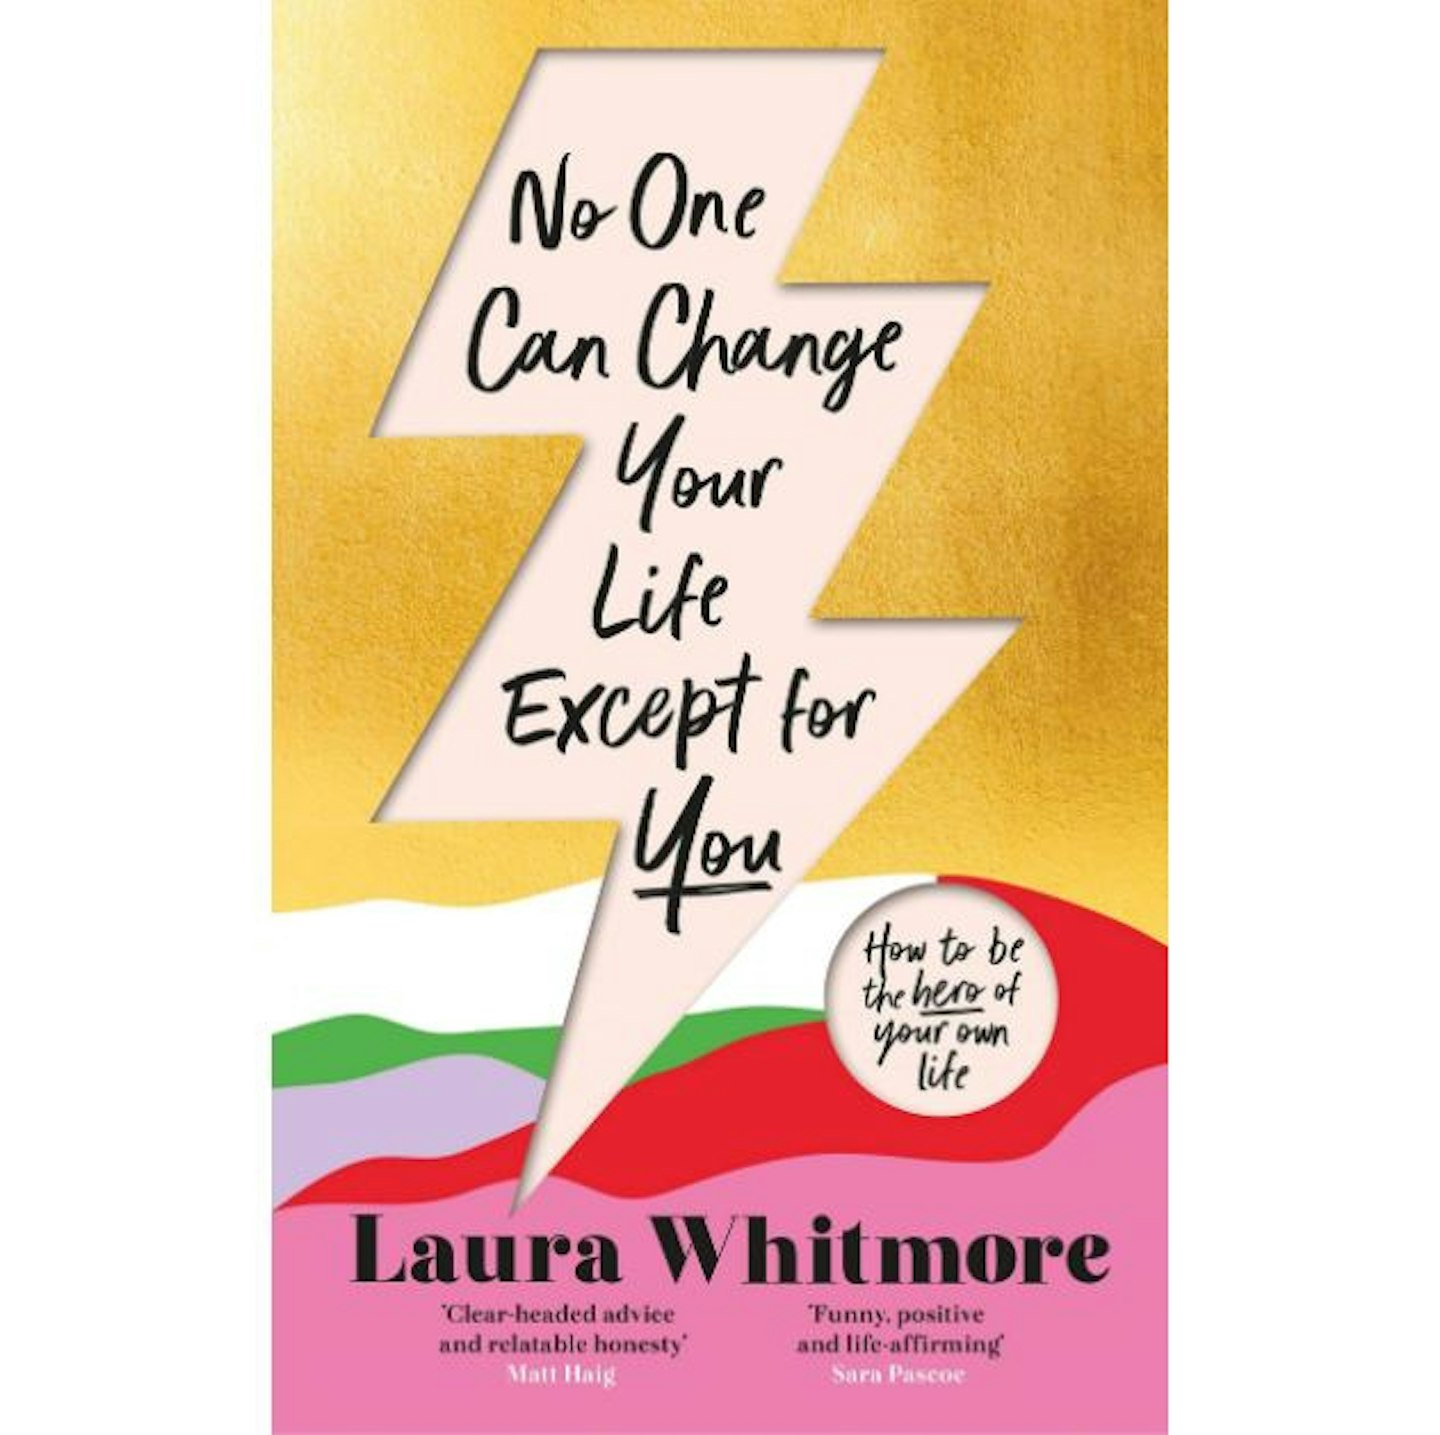 No One Can Change Your Life Except You by Laura Whitmore